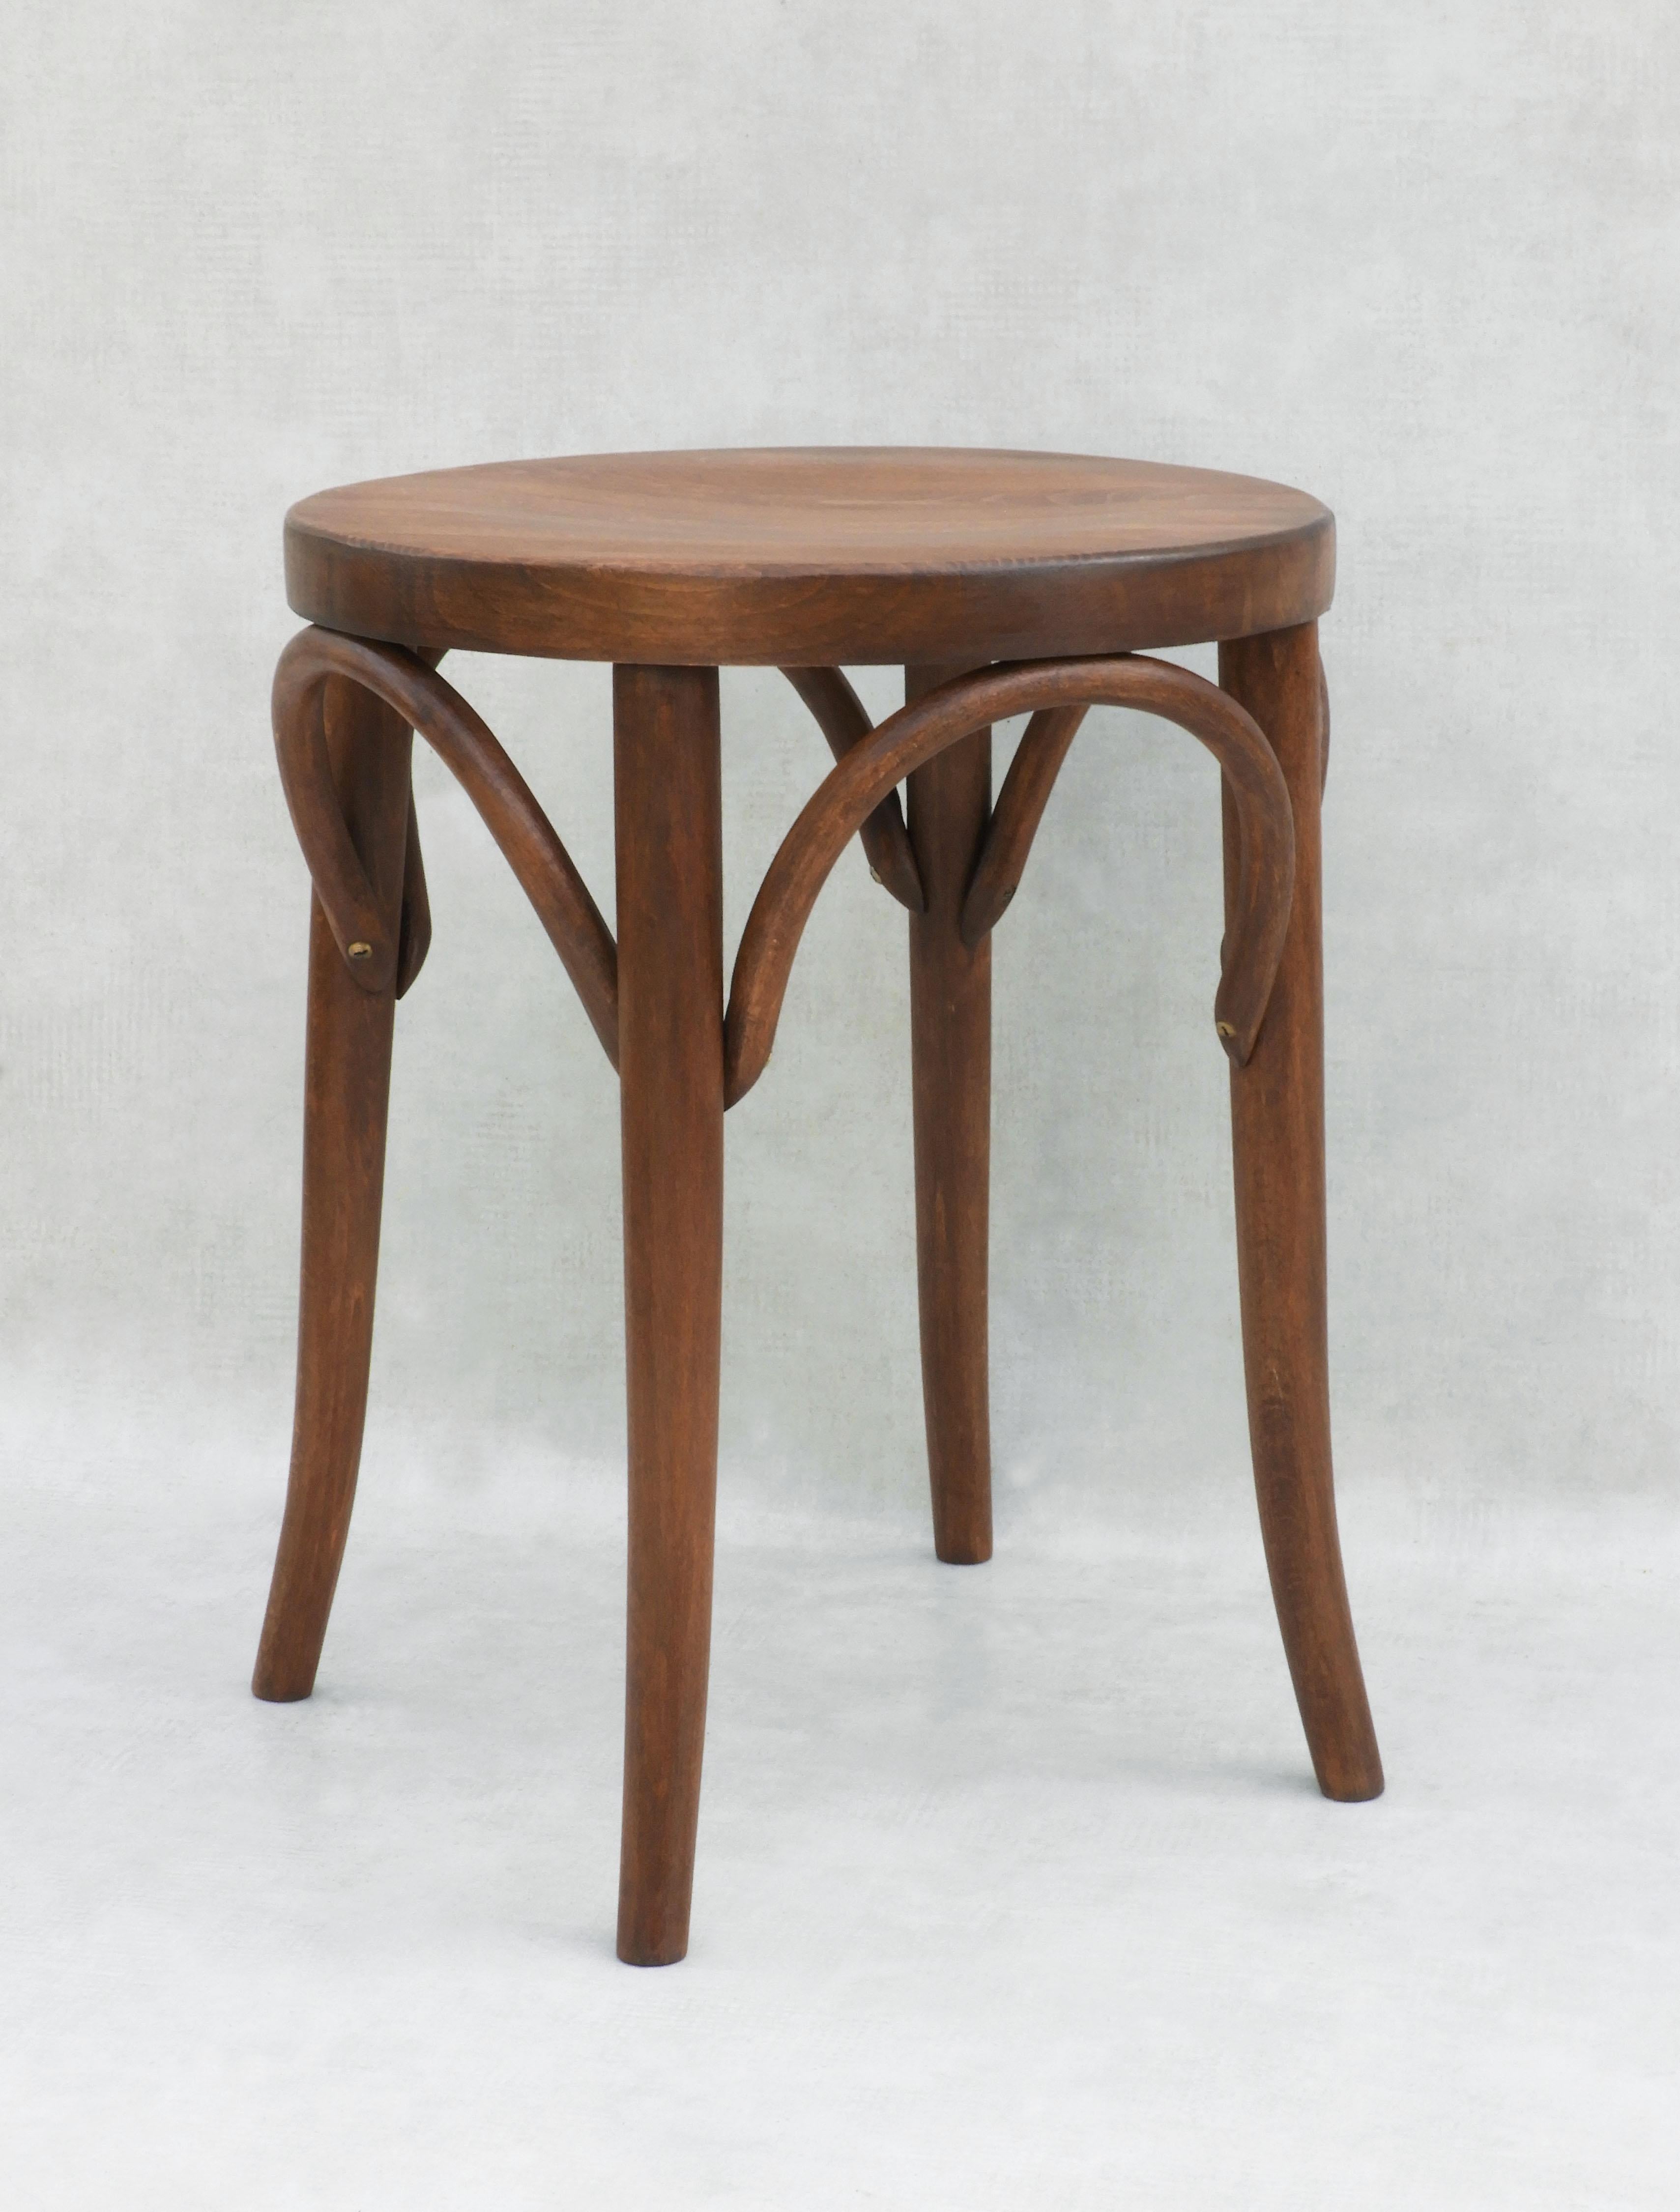 A mid-century bentwood stool with a solid wooden seat, in the style of Thonet, C1950s France.  Well-made round tabouret stool, sturdy and sound with good colour, grain, nice patina and in great vintage condition.  The more unusual solid wood top has